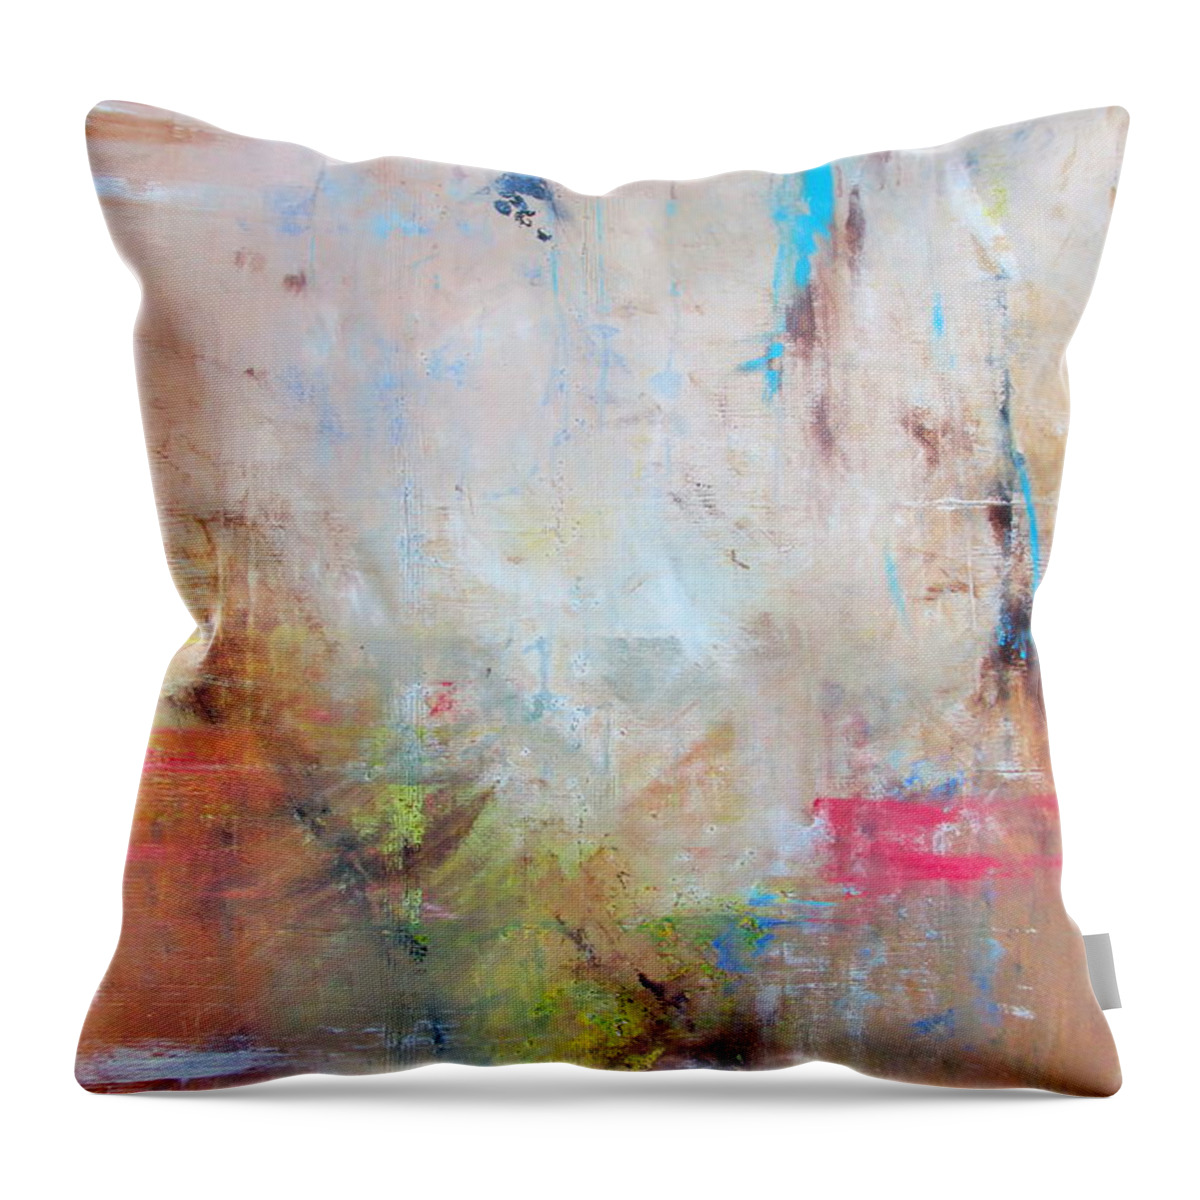 First Day Throw Pillow featuring the painting First Day by Pristine Cartera Turkus